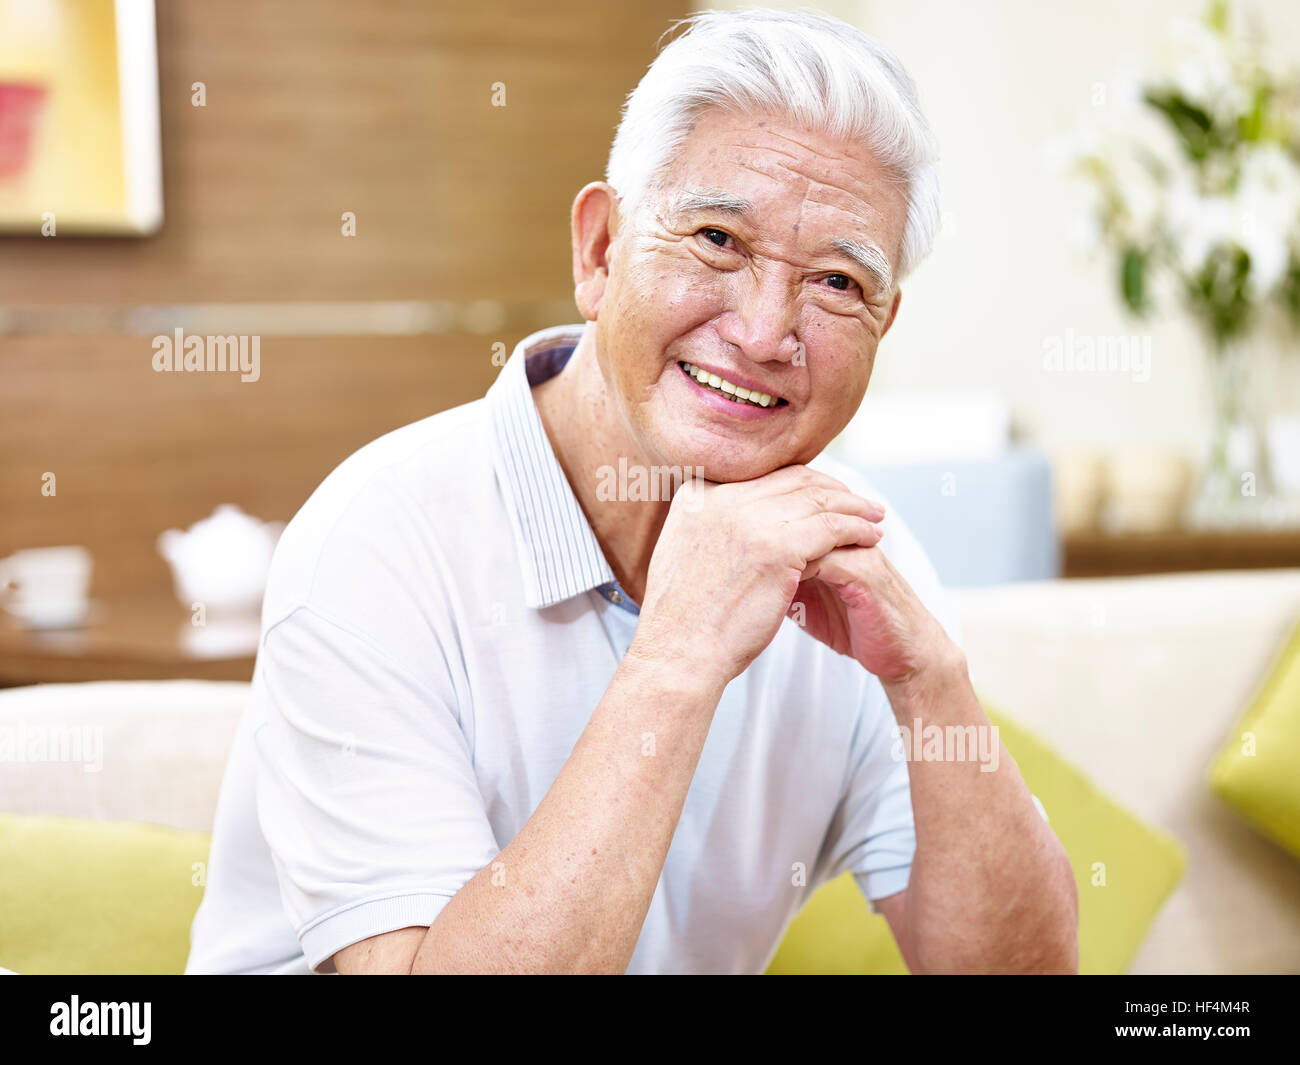 8. Asian man with blonde tips - wide 8